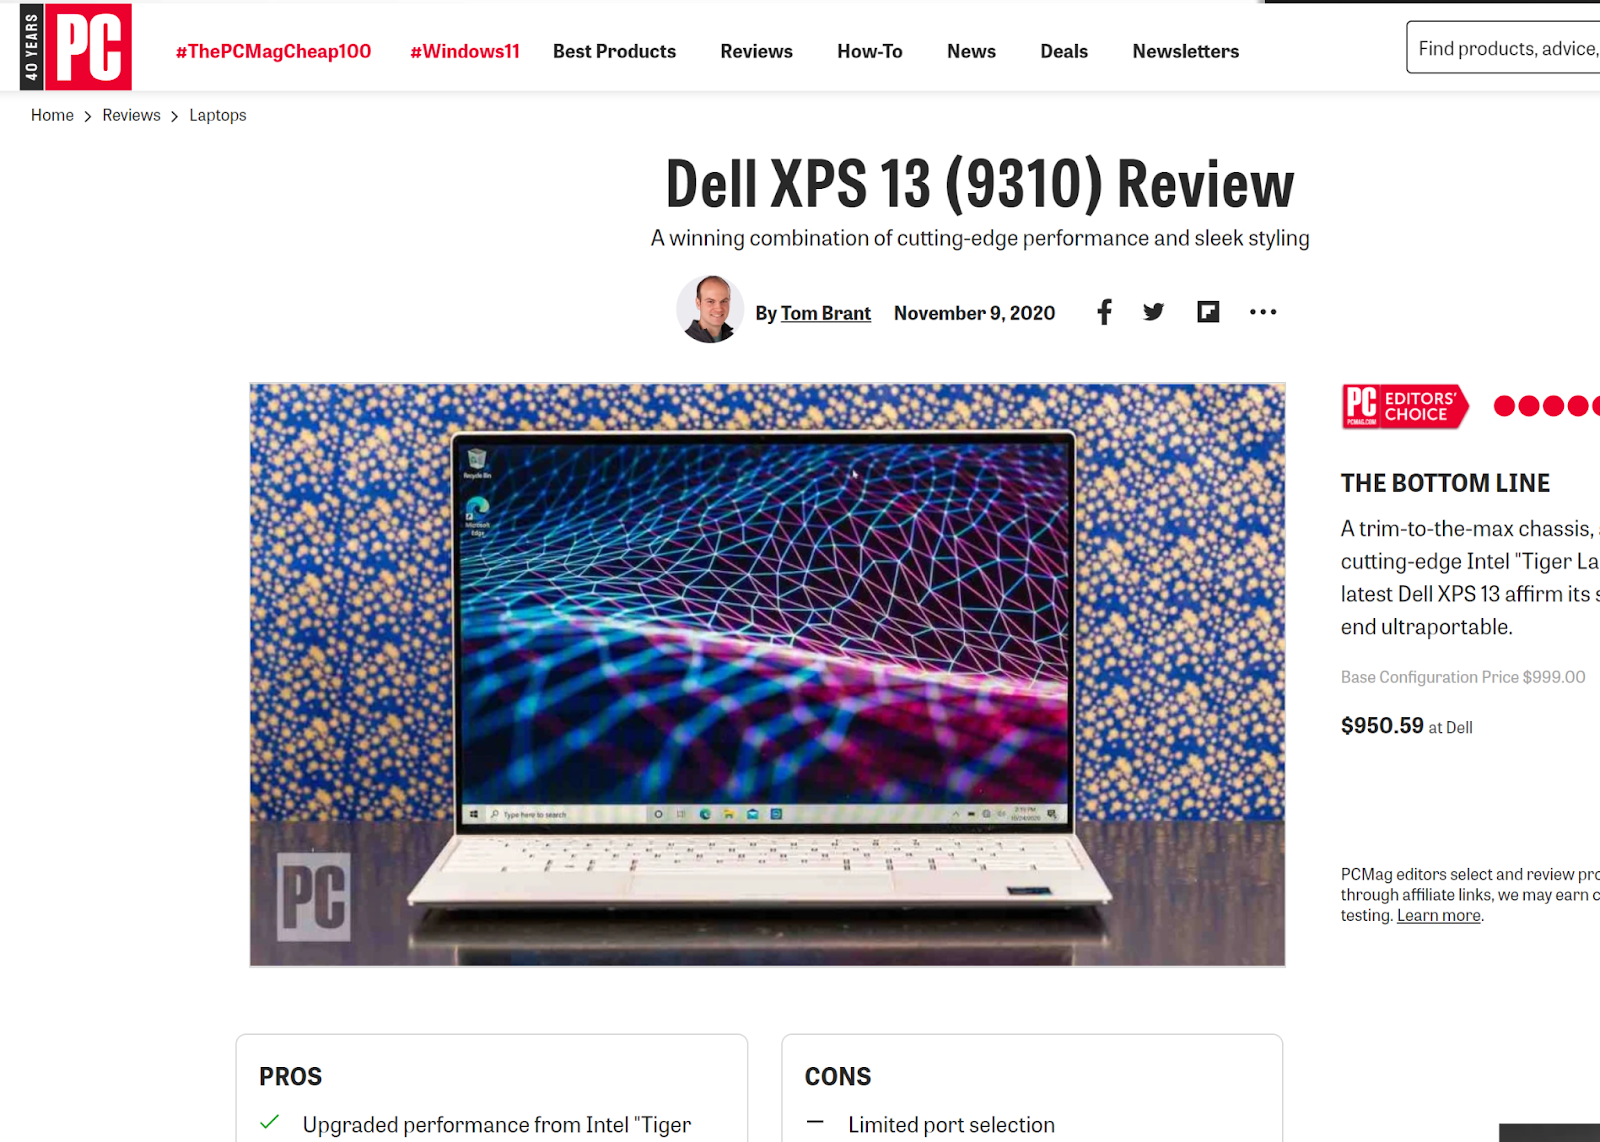 dell xps 13 single product review from PC Mag